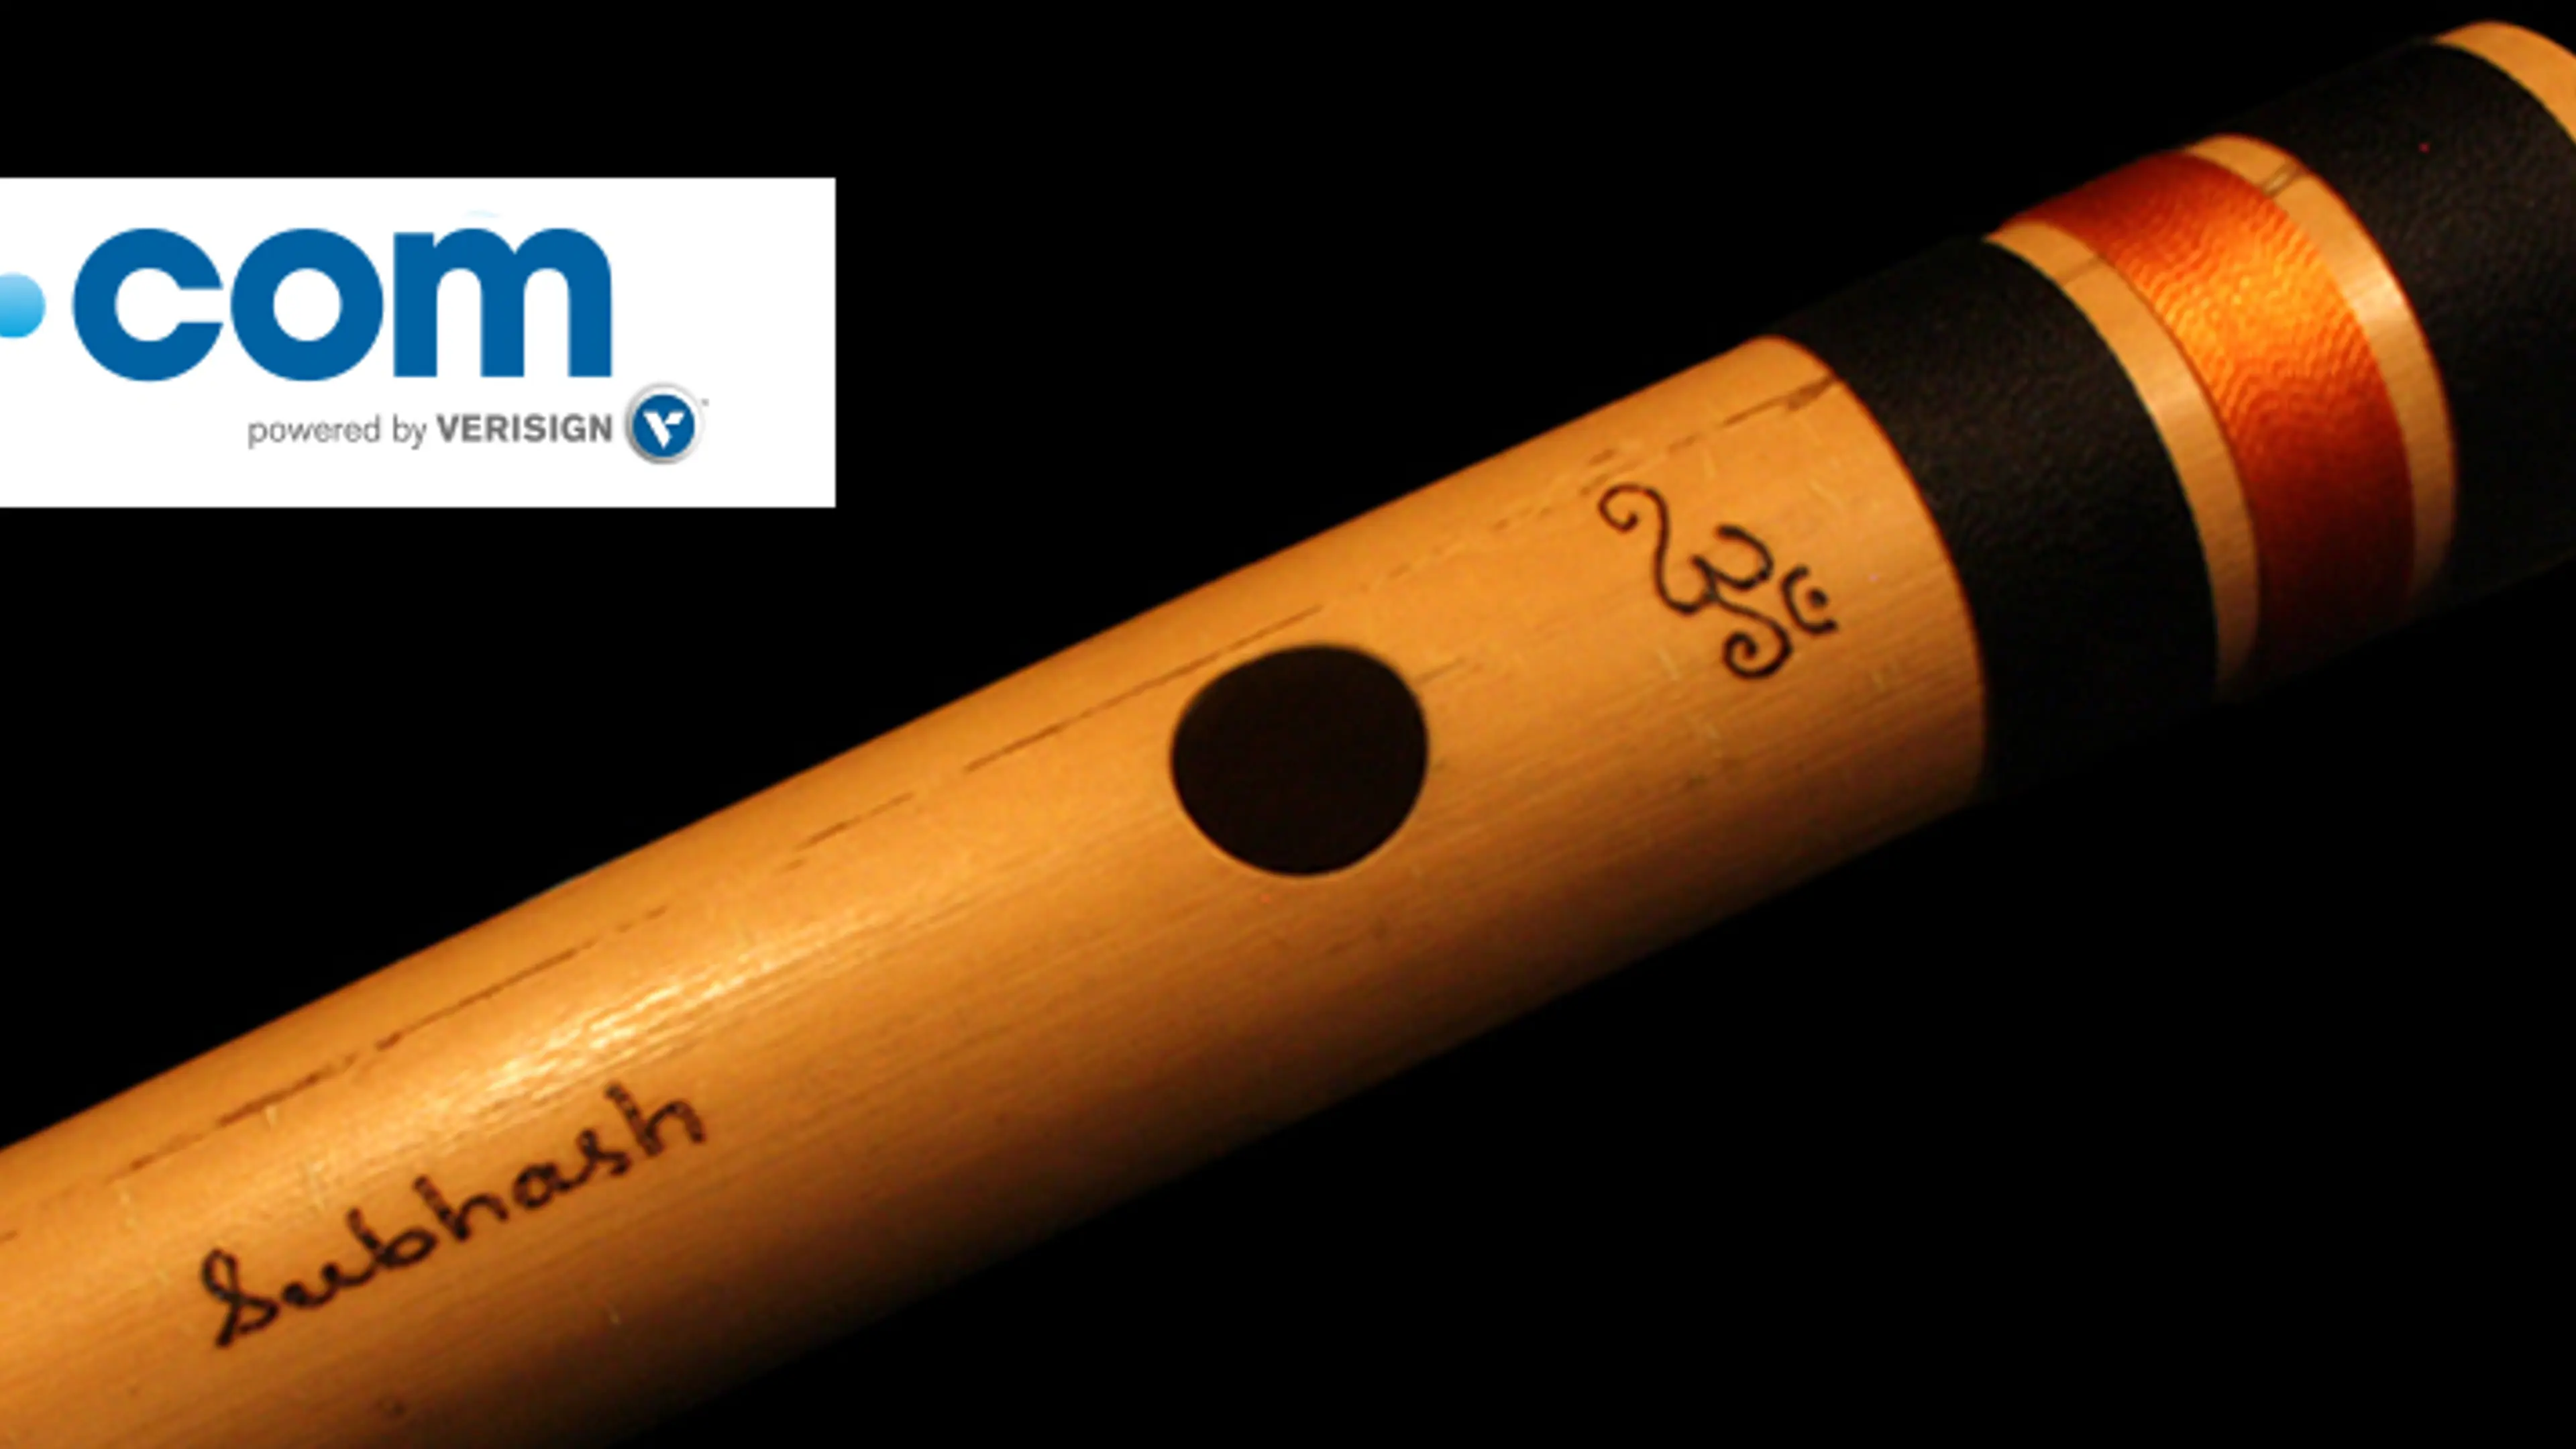 Punam Flutes – The story of how a maestro became a master craftsman